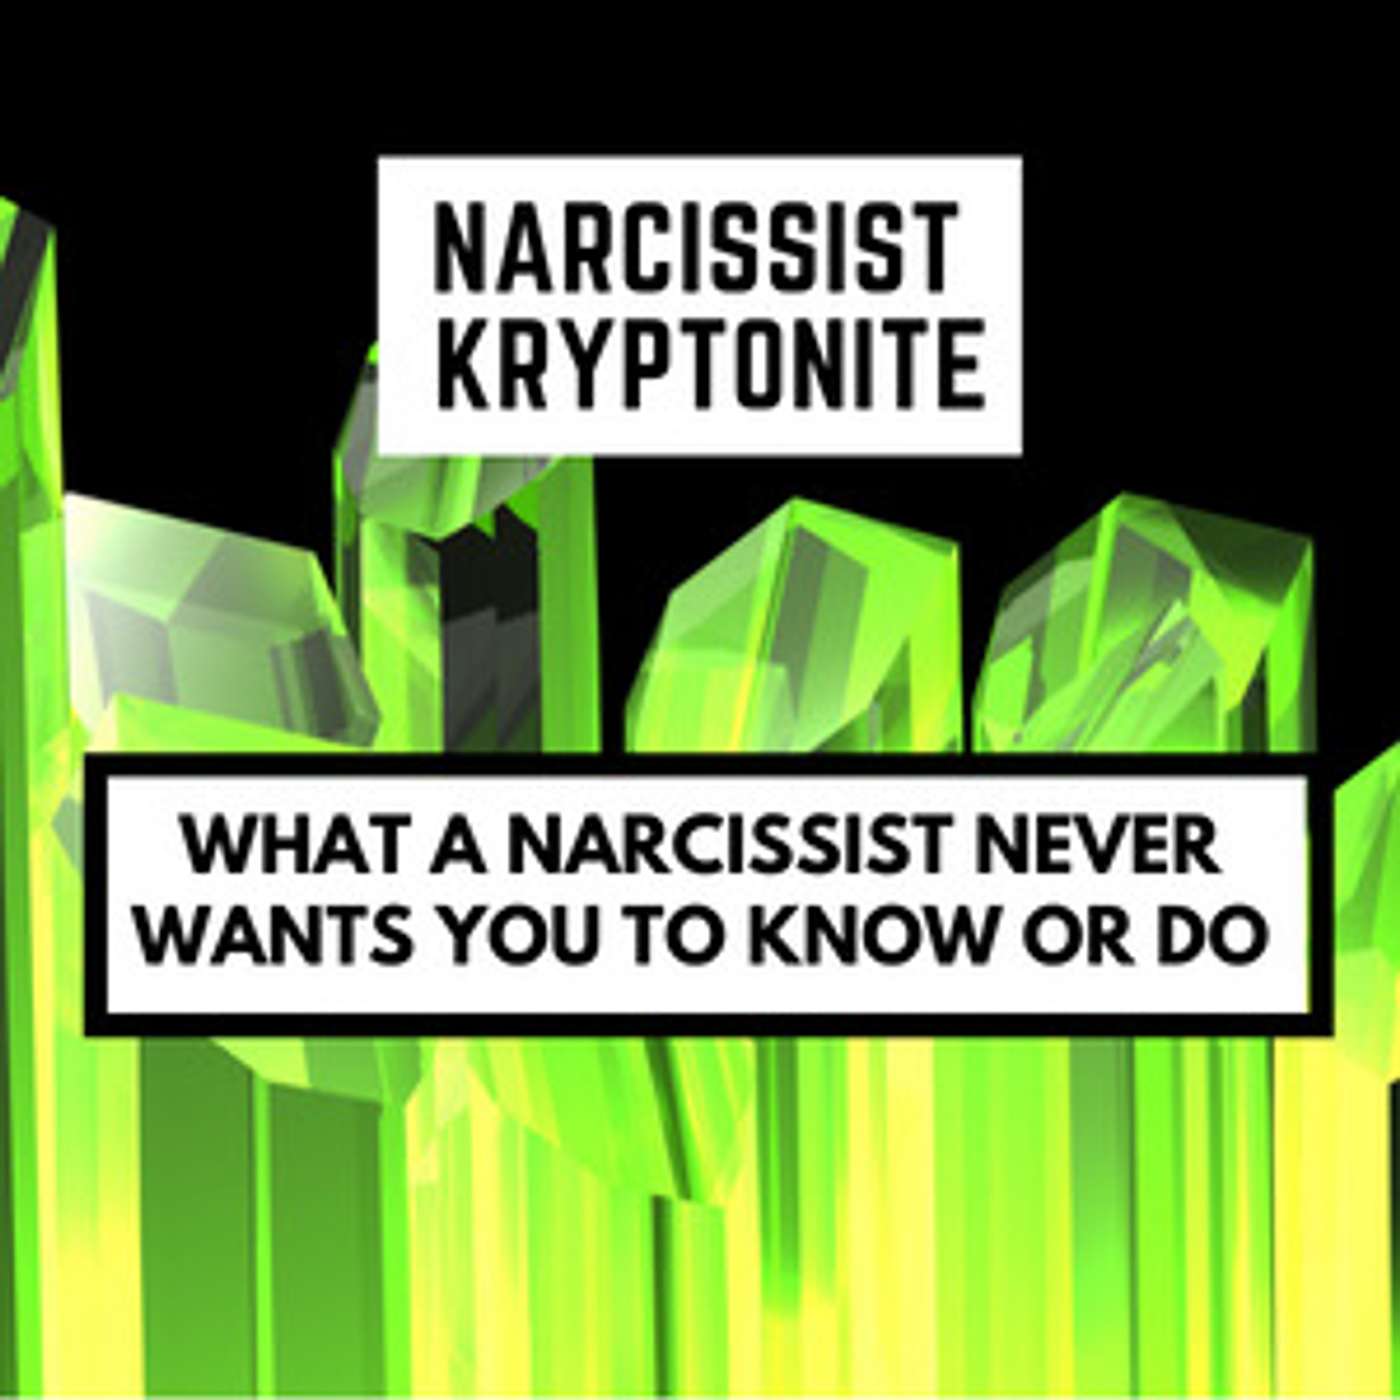 Narcissist Kryptonite: What They Don't Want You To Know